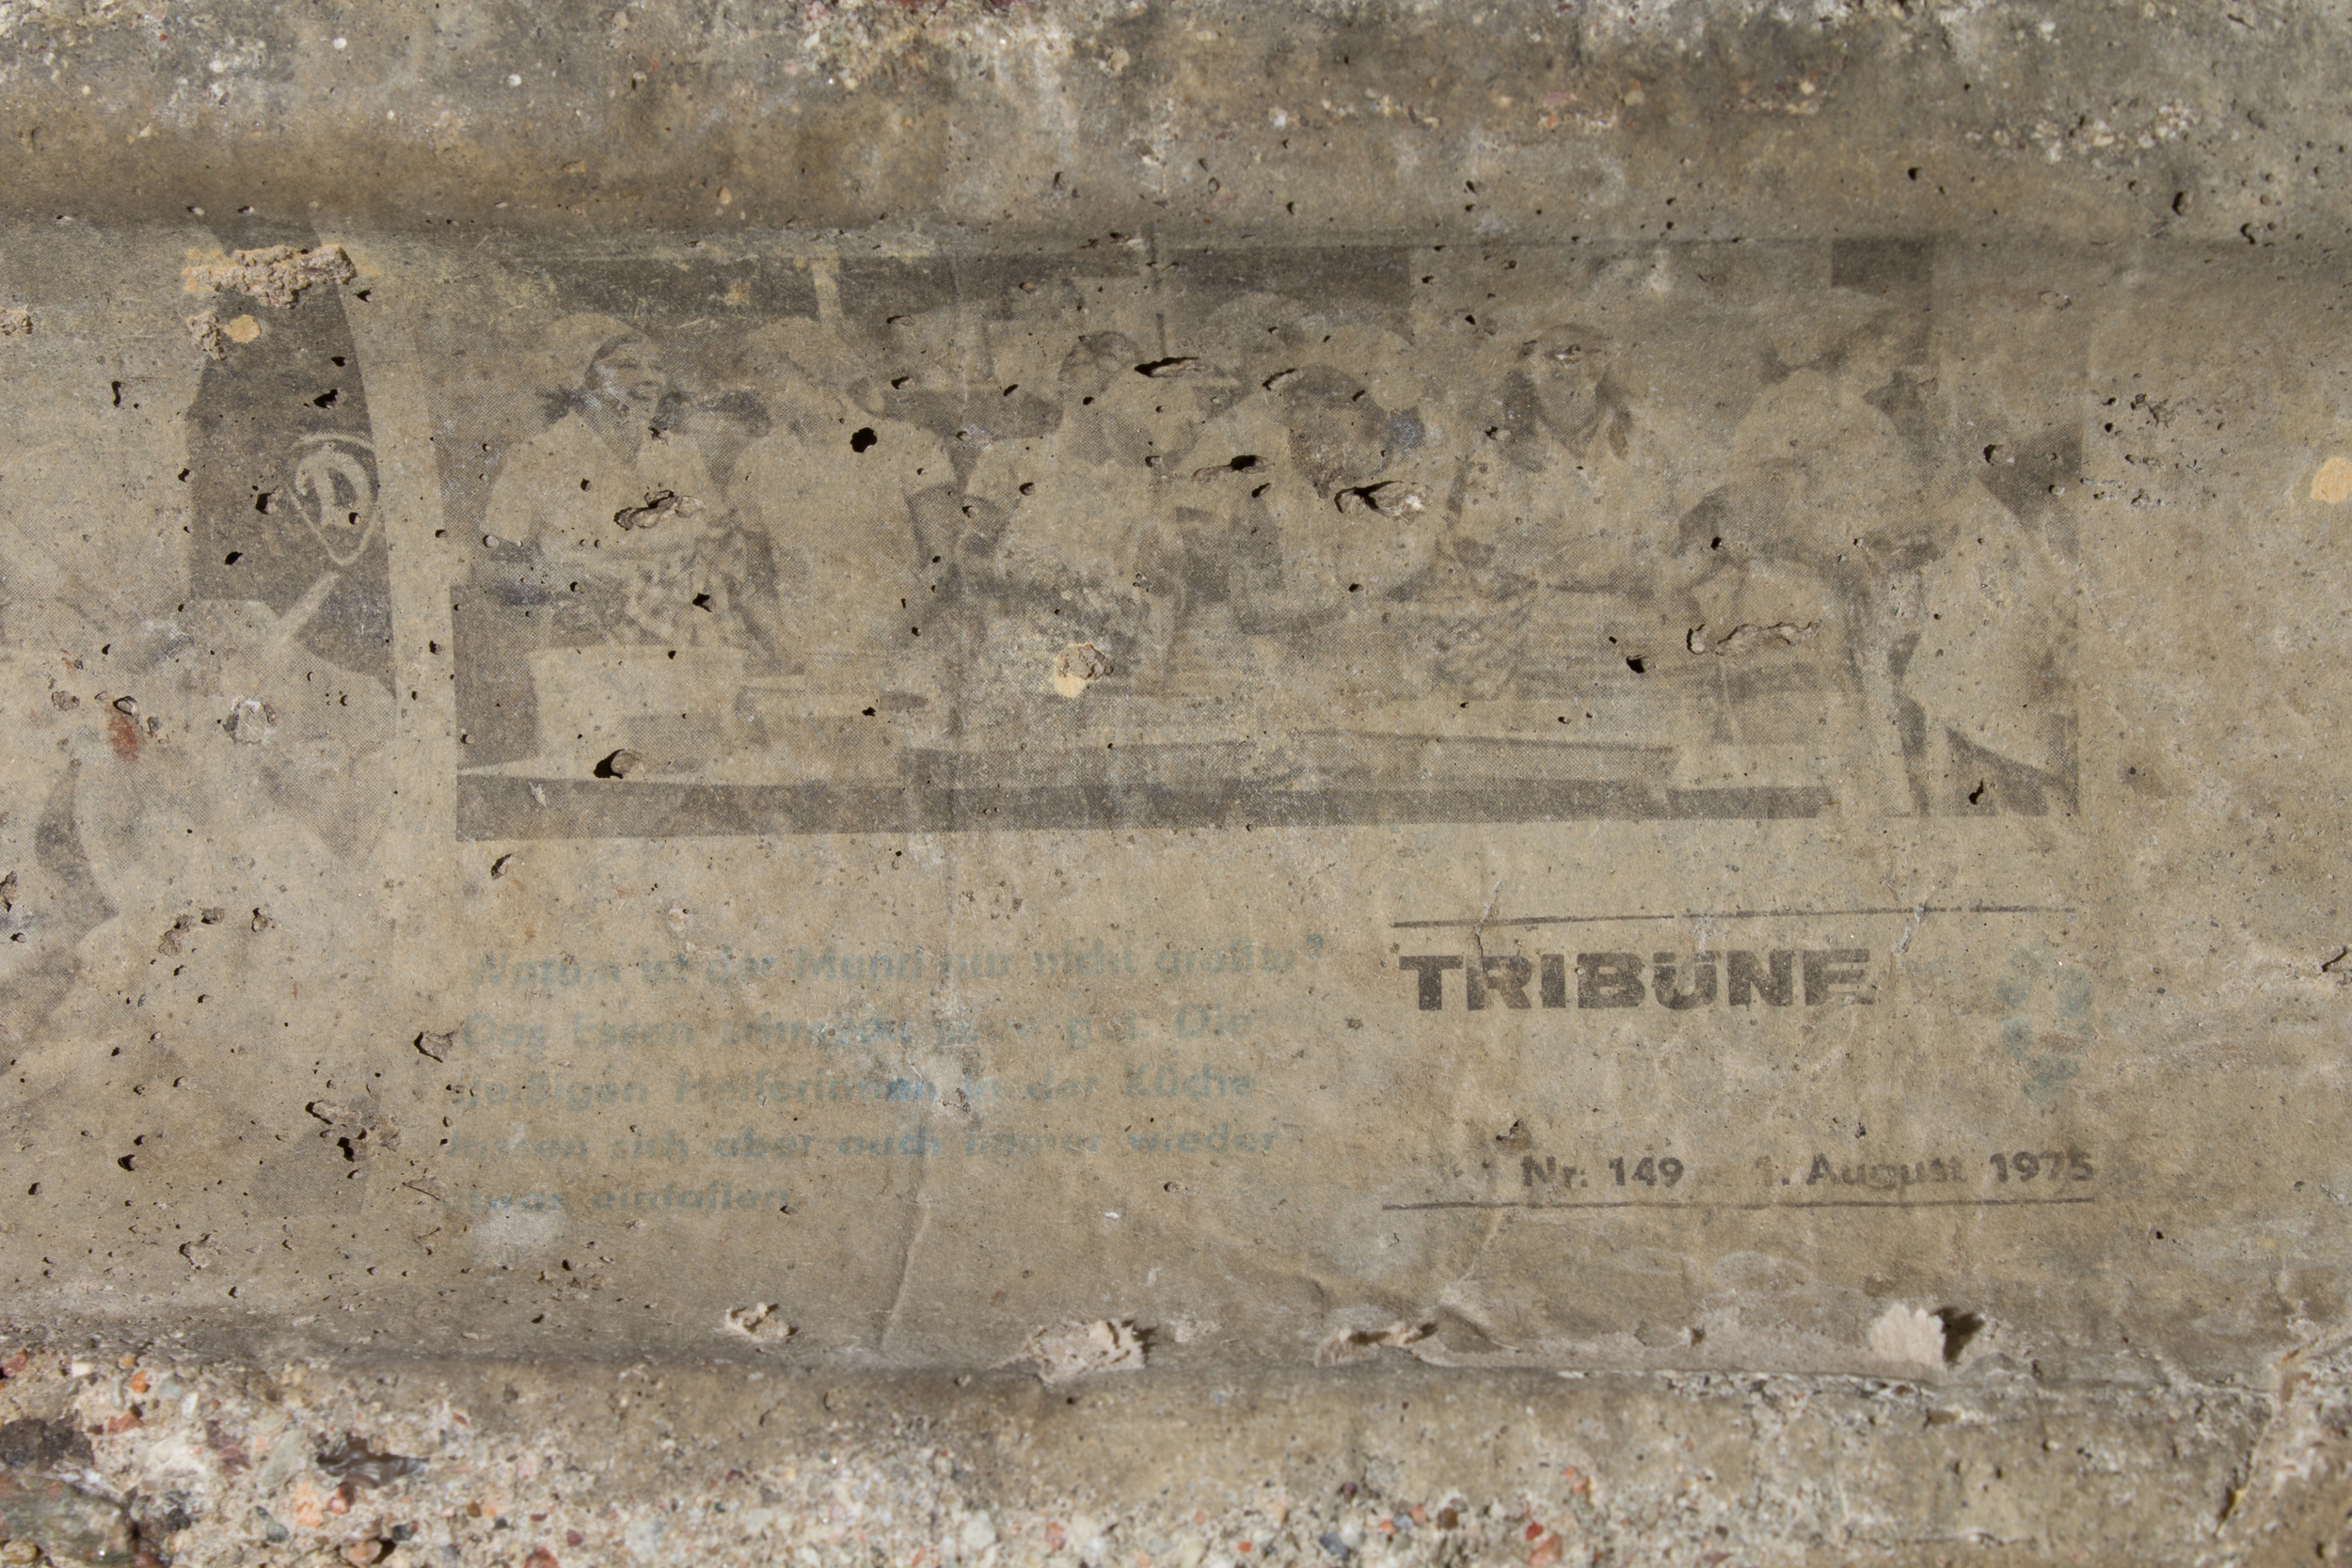  Transferred ink from a newspaper with the date August 1975 is visible in the concrete of segment 96, confirming a construction date of 1975 or later. (Image inverted for legibility).  Image   
  
 
  
    
  
 Normal 
 0 
 
 
 
 
 false 
 false 
 fa